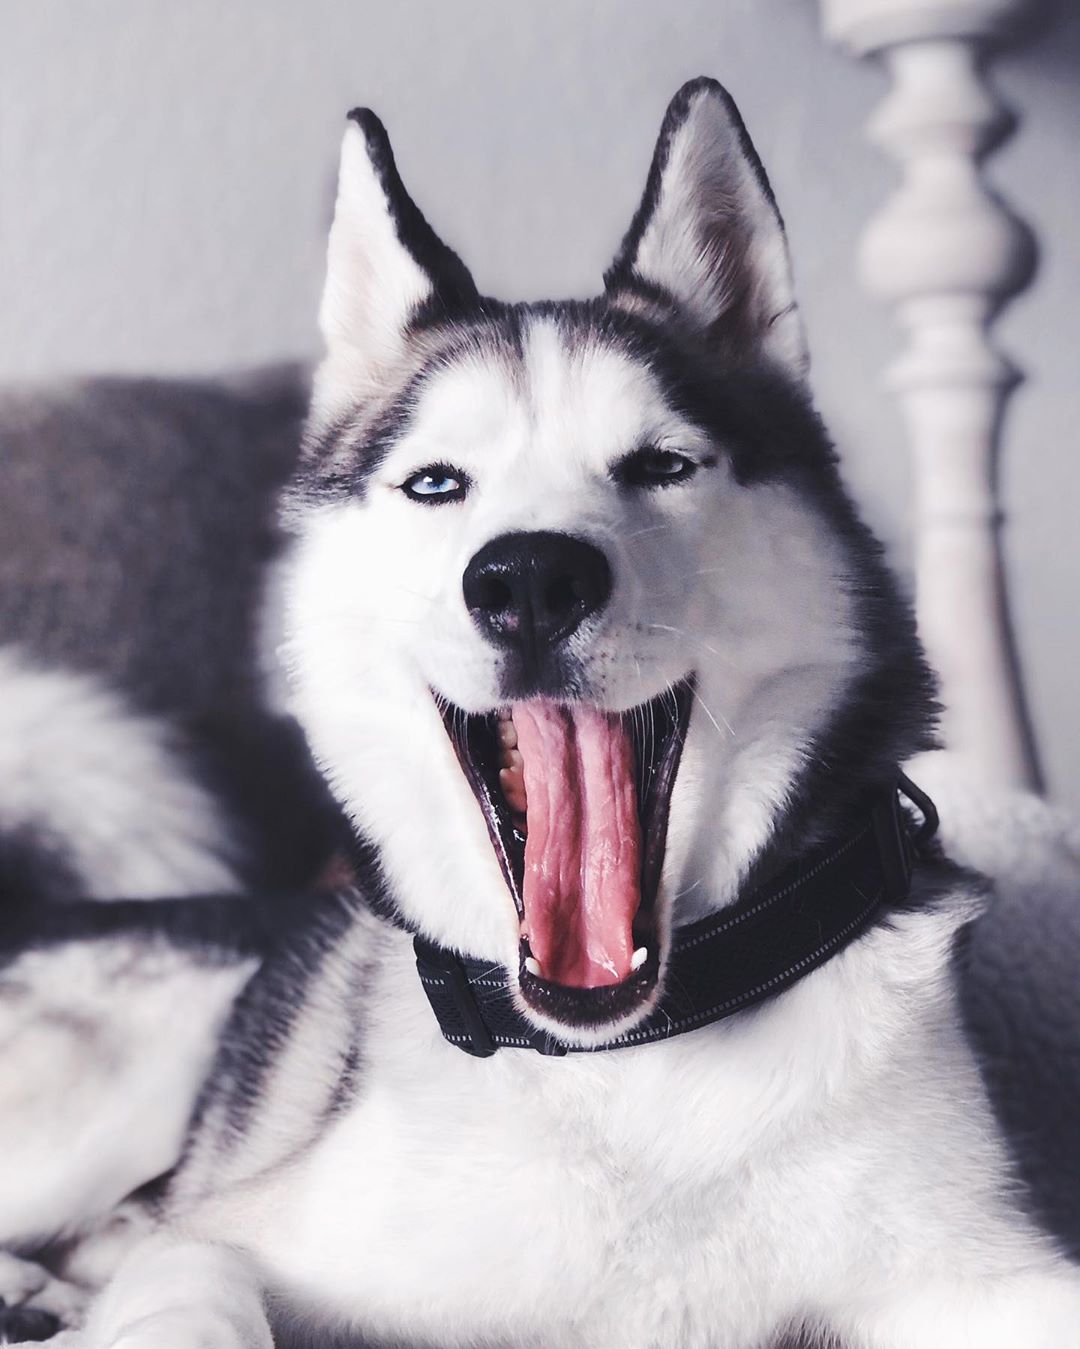 A Siberian Husky lying on the couch while yawning